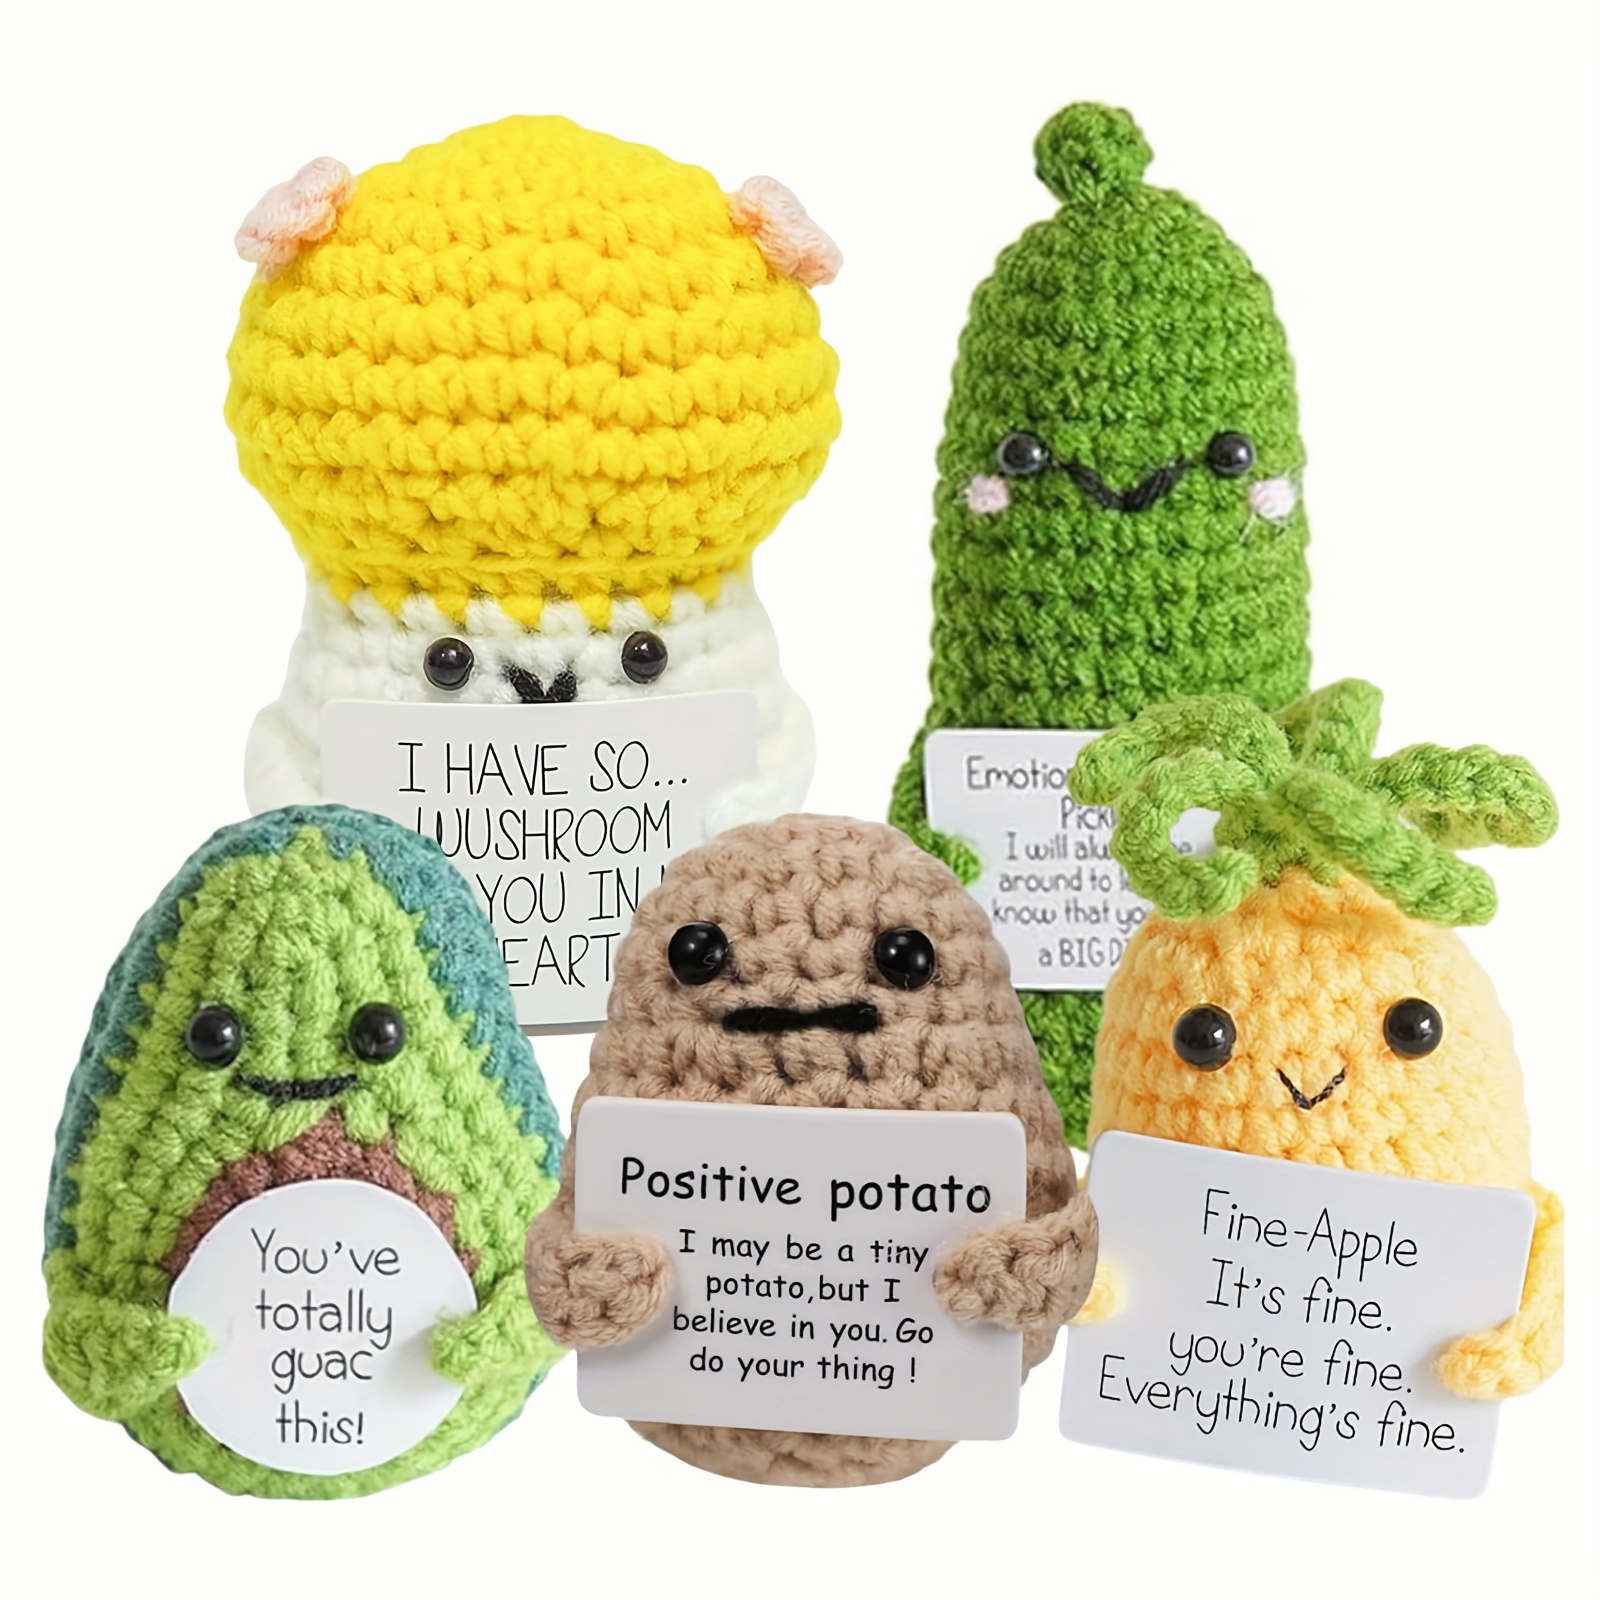 

5pcs Cute Emotional Support Plush Dolls Set - Positive Pickle, Potato, Avocado With Inspirational Cards - Crochet Crafted Encouragement Gifts For Friends